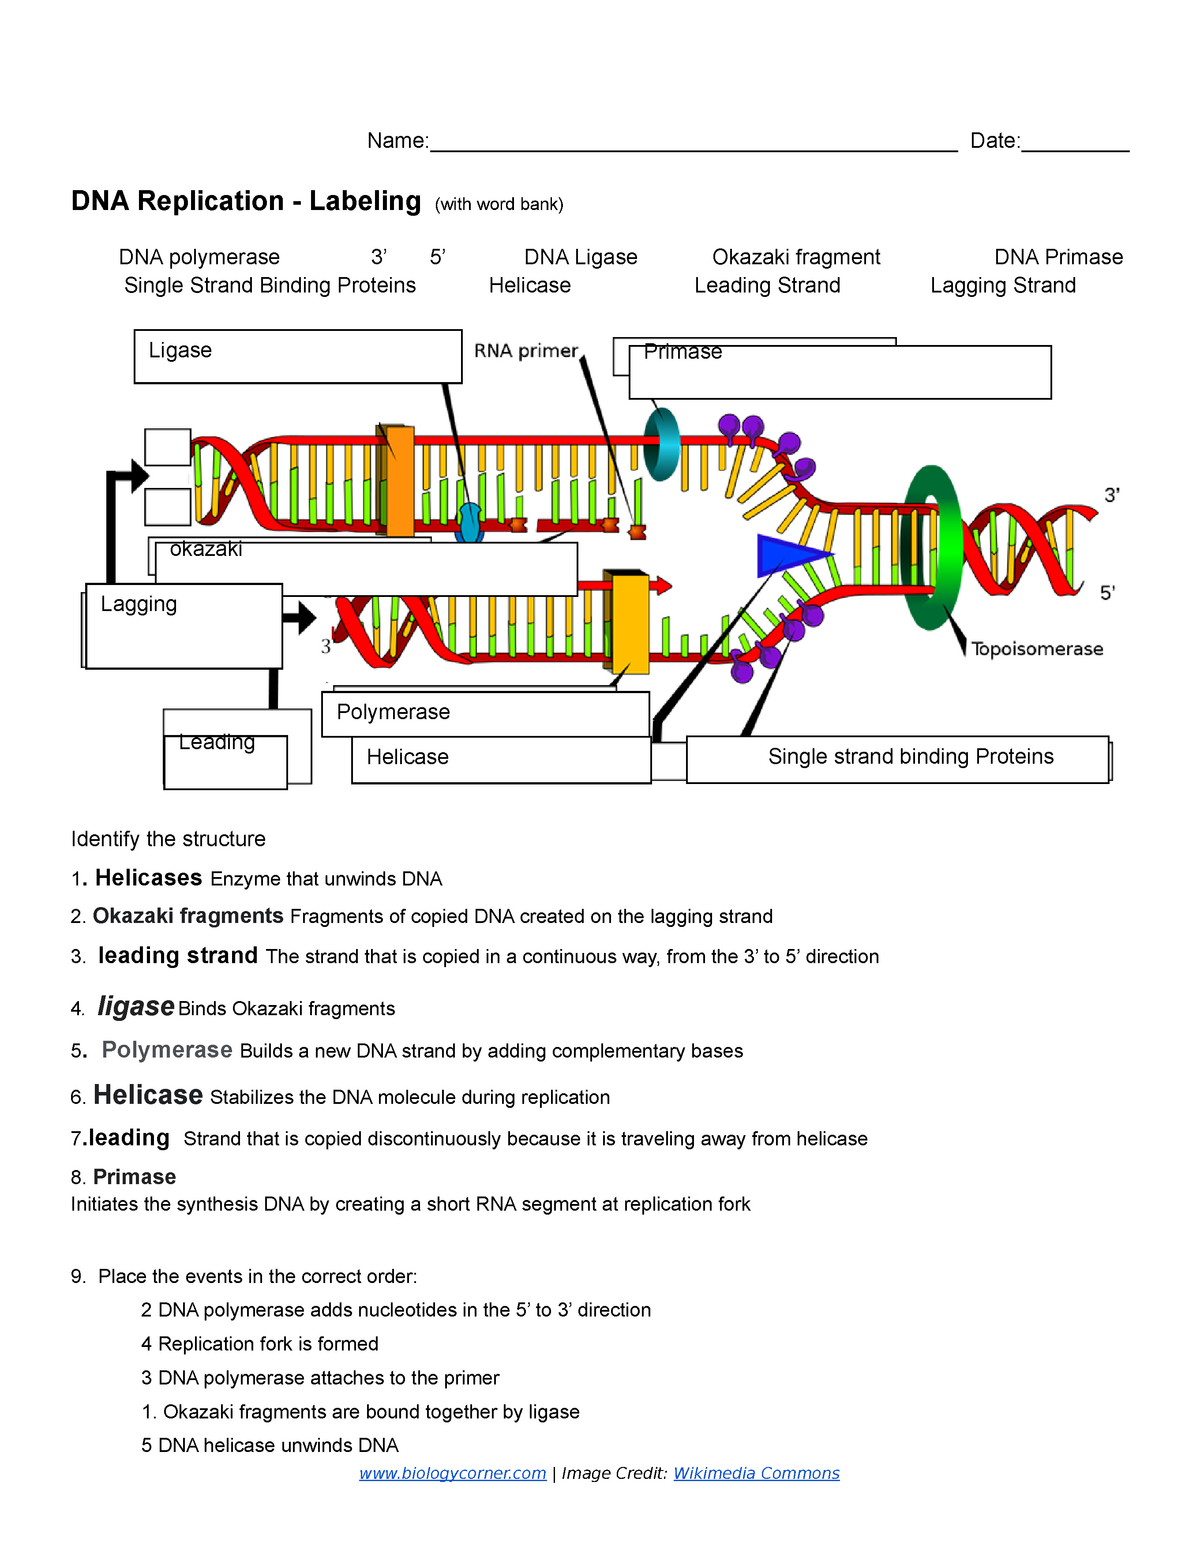 Copy of DNA Replication - Labeling 24 - Name: - StuDocu Within Dna Replication Worksheet Answers